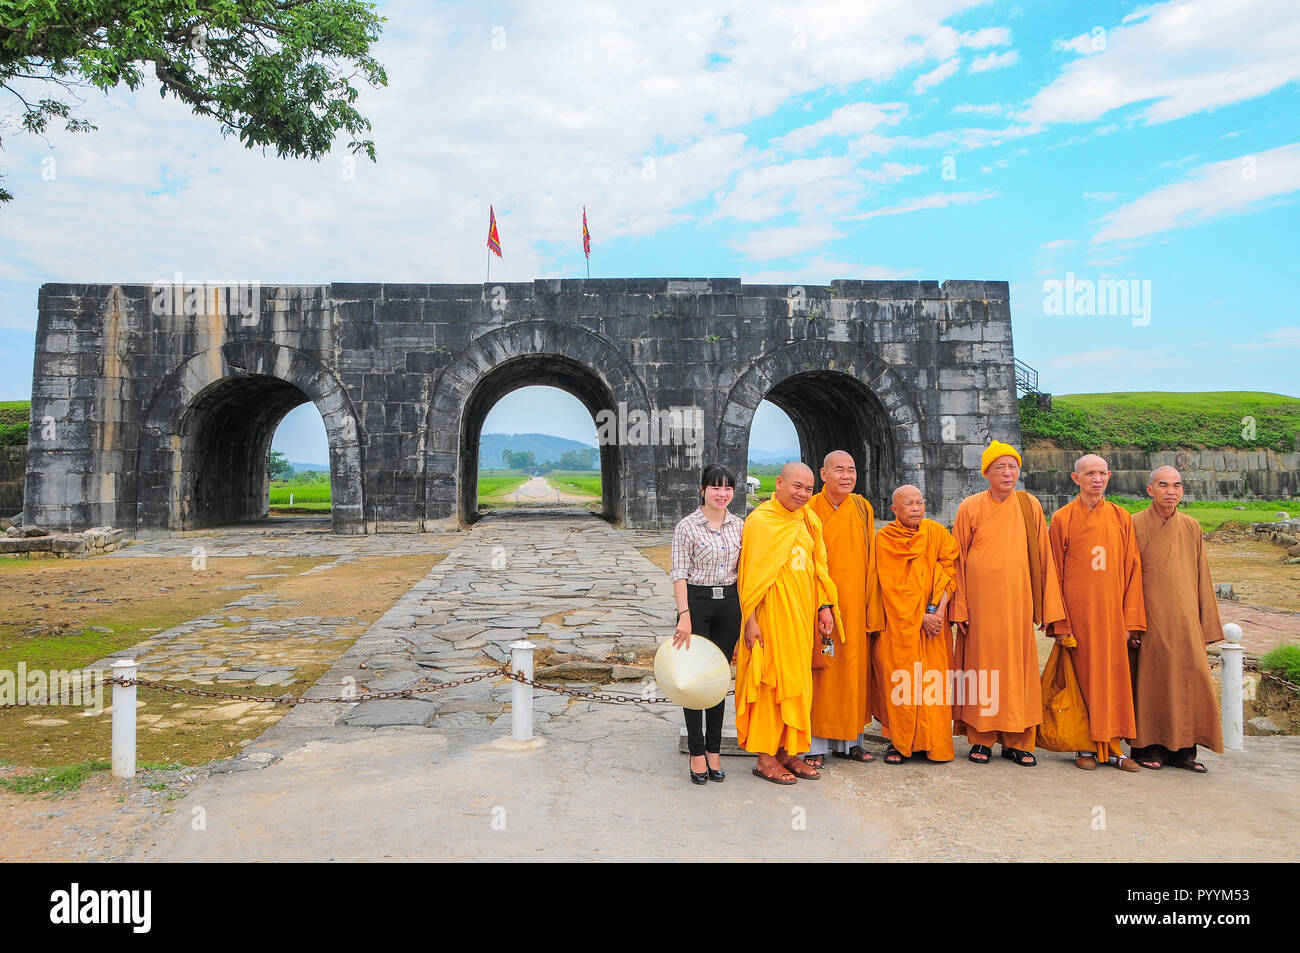 Ho Citadel, Thanh Hoa Province, Vietnam - May 9, 2014. Tour guide and monks at the south gate of the citadel, which became a UNESCO World Heritage Sit Stock Photo